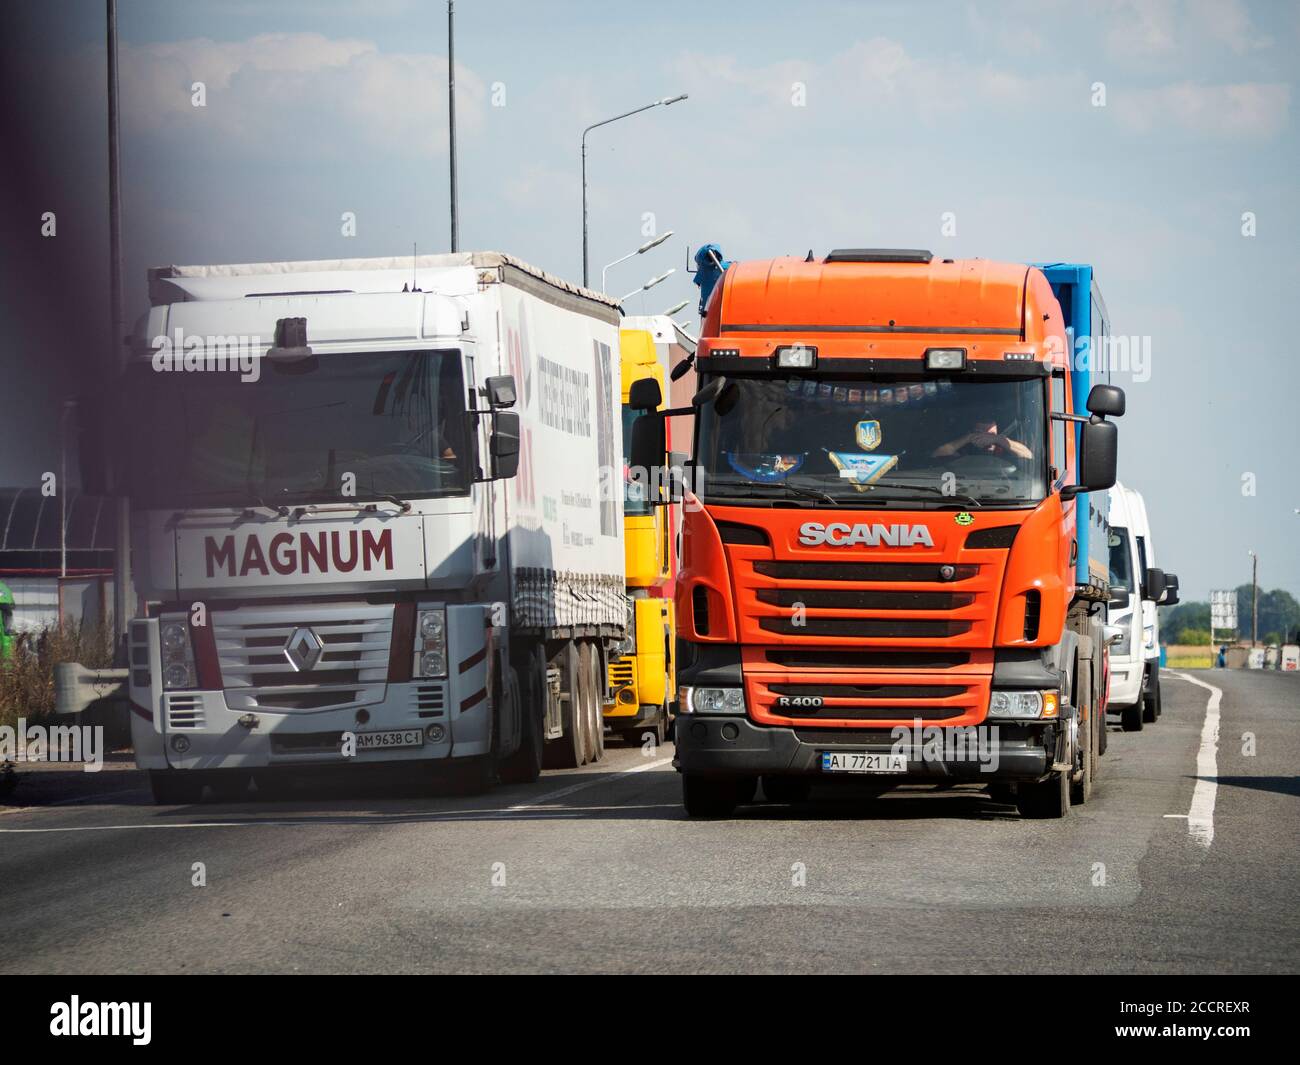 Renault Magnum and Scania trucks on the highway near Kiev Stock Photo